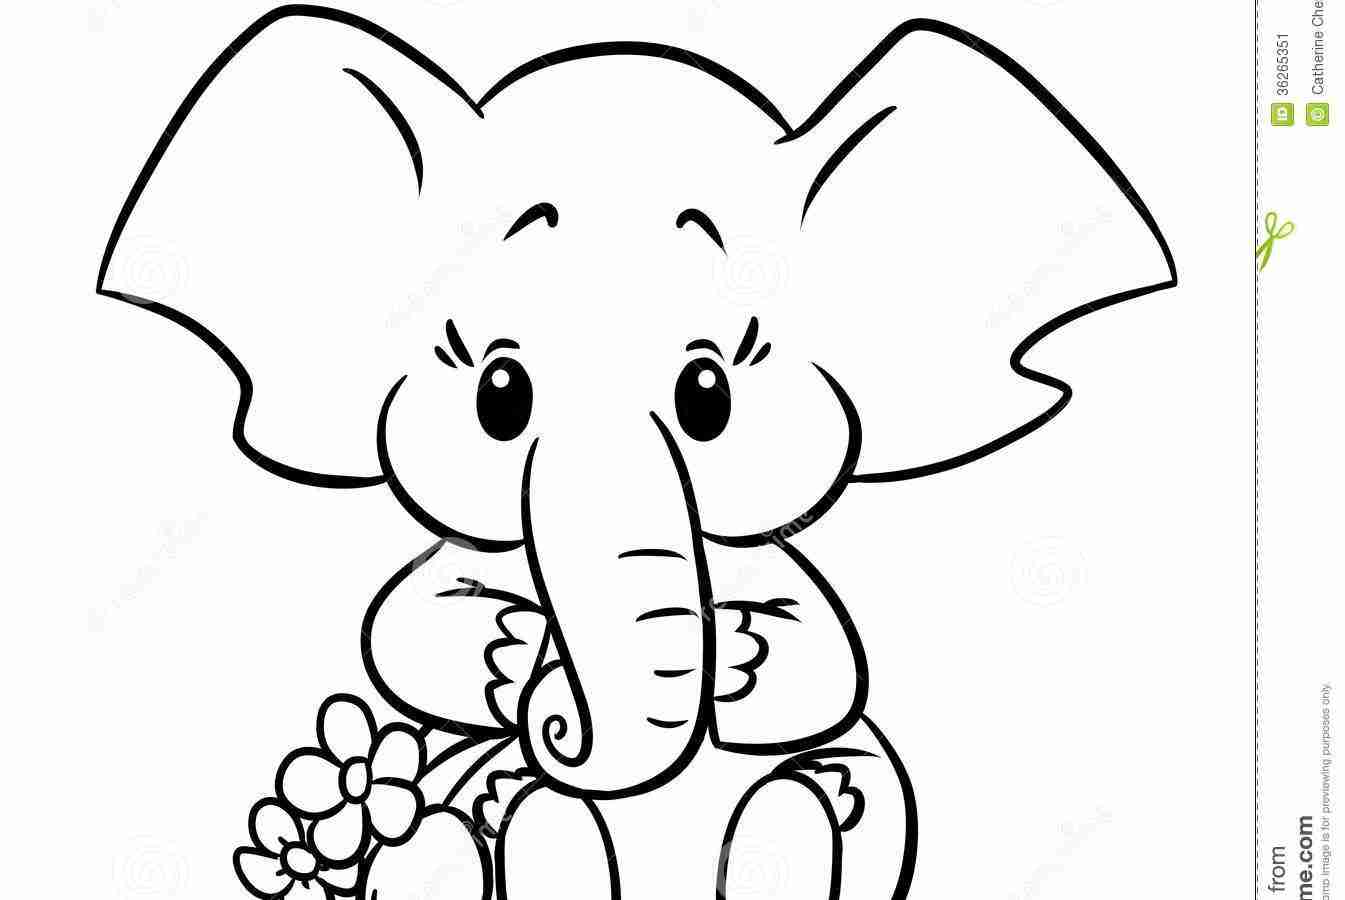 Download Asian Elephant Coloring Pages